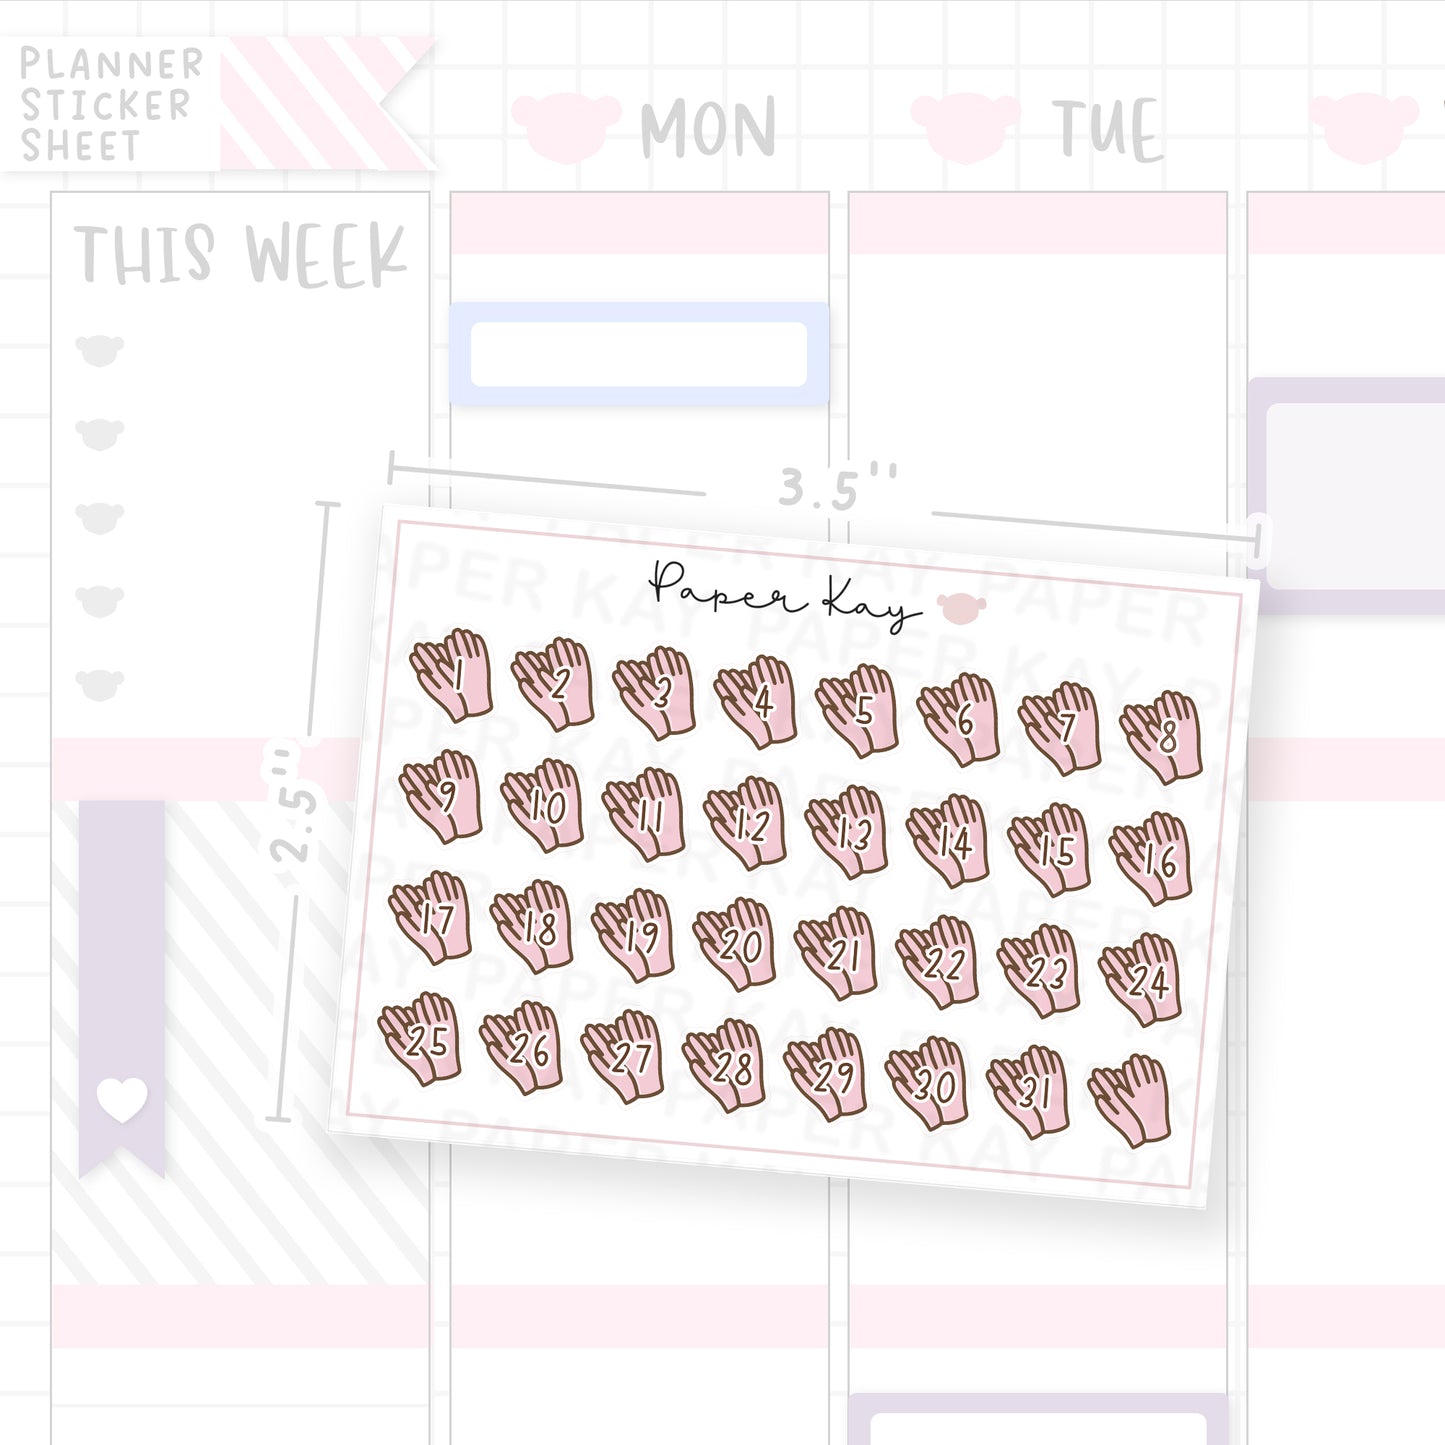 Spring Cleaning Date Dot Stickers